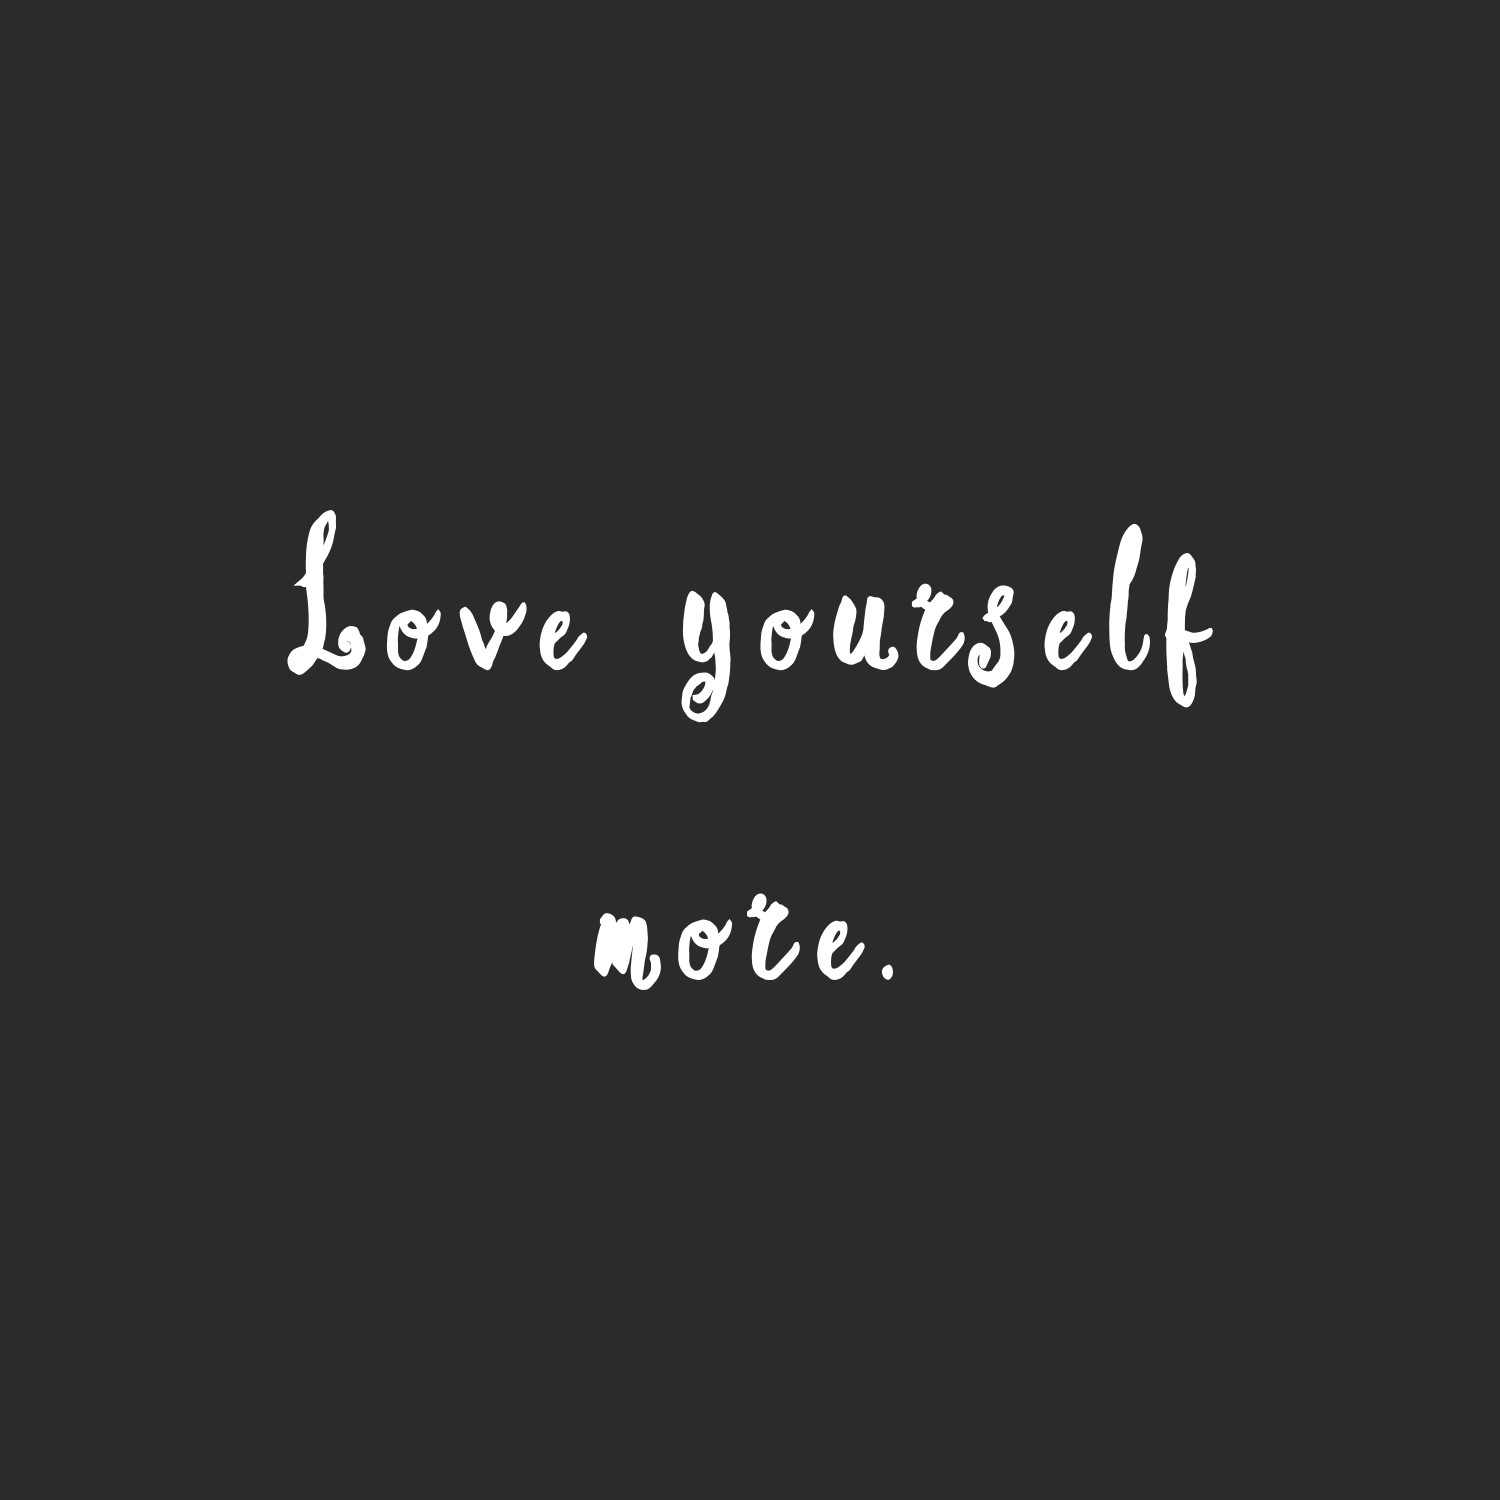 Love yourself more! Browse our collection of inspirational exercise and weight loss quotes and get instant health and fitness motivation. Transform positive thoughts into positive actions and get fit, healthy and happy! https://www.spotebi.com/workout-motivation/love-yourself-more-inspirational-exercise-and-weight-loss-quote/